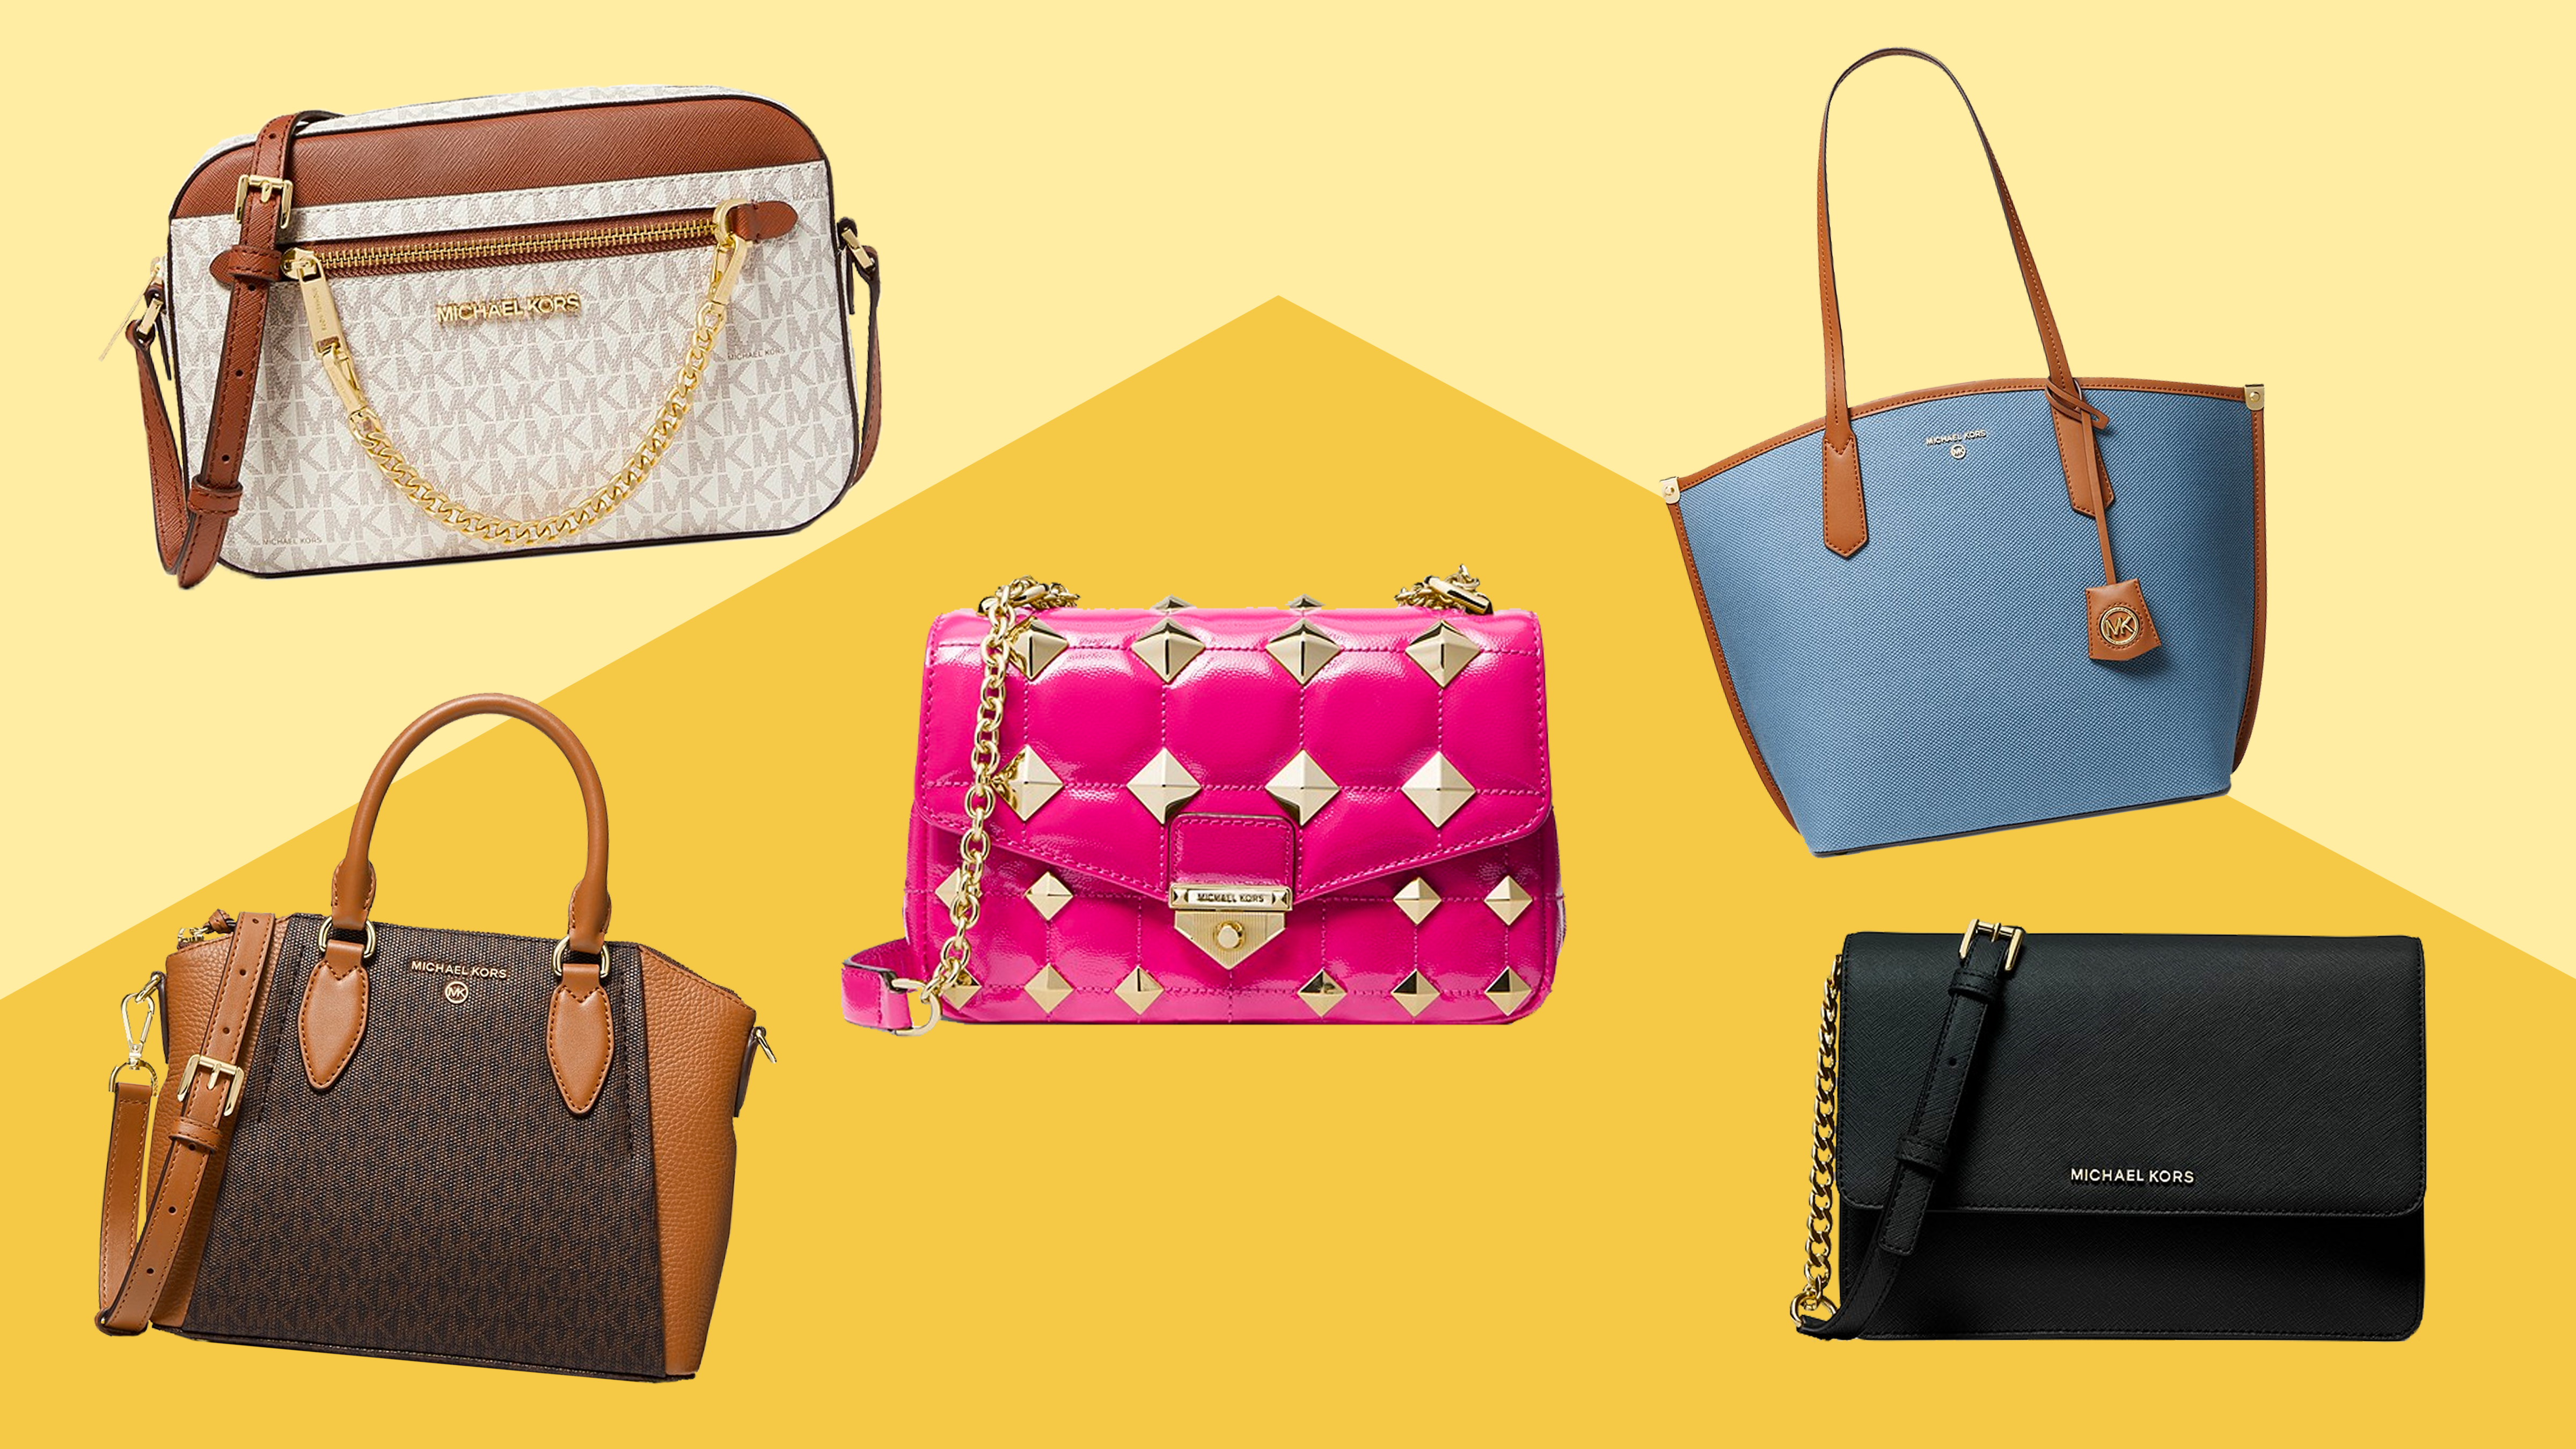 halt Spild Perfervid Michael Kors sale: Save an extra 15% on purses and handbags right now